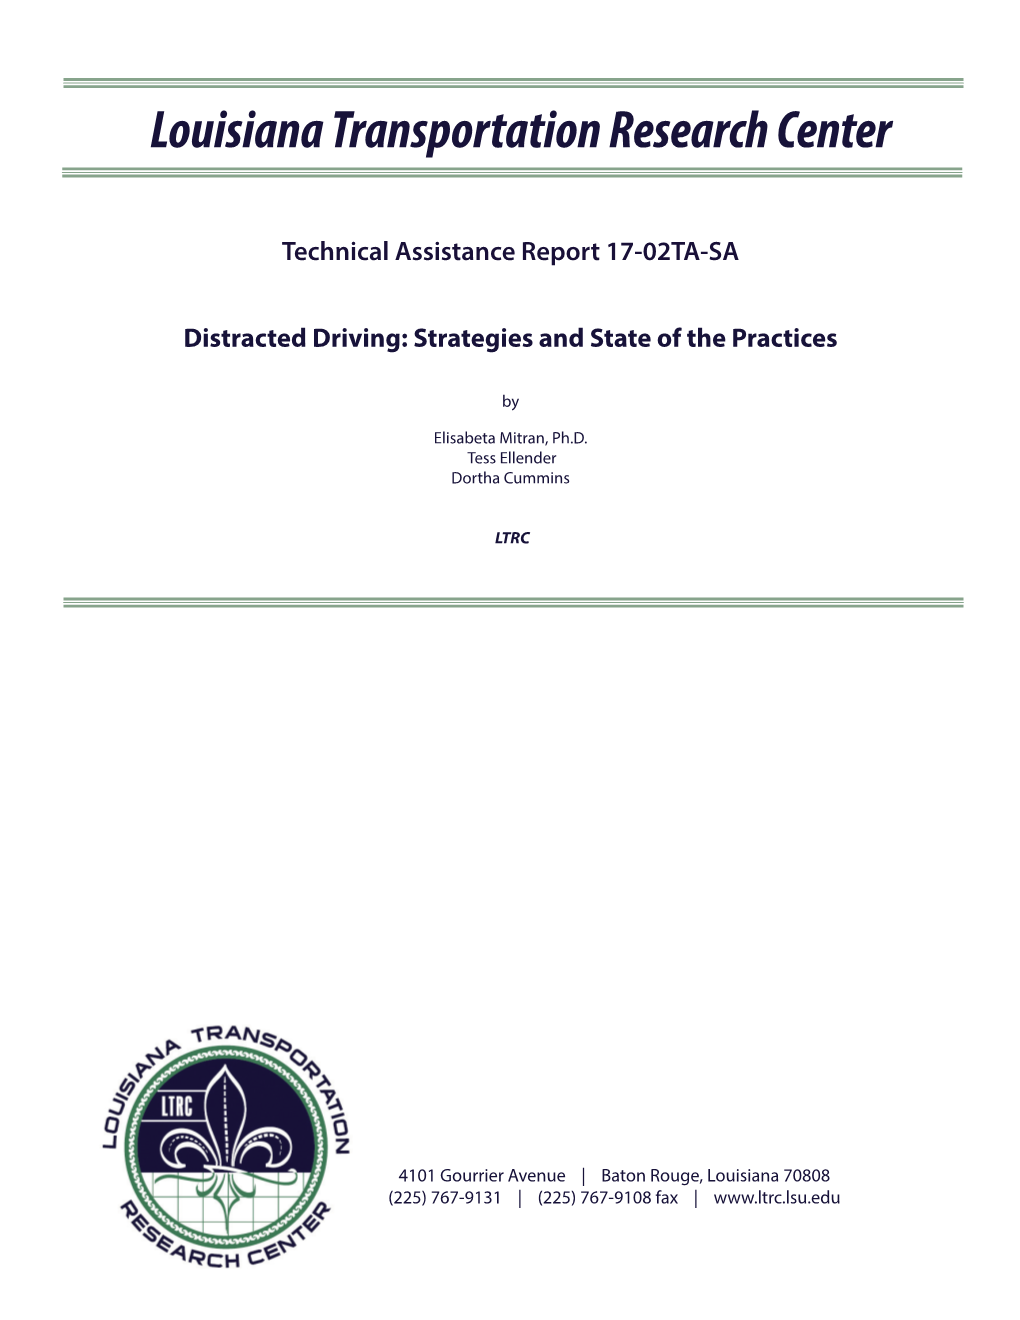 Distracted Driving: Strategies and State of the Practices